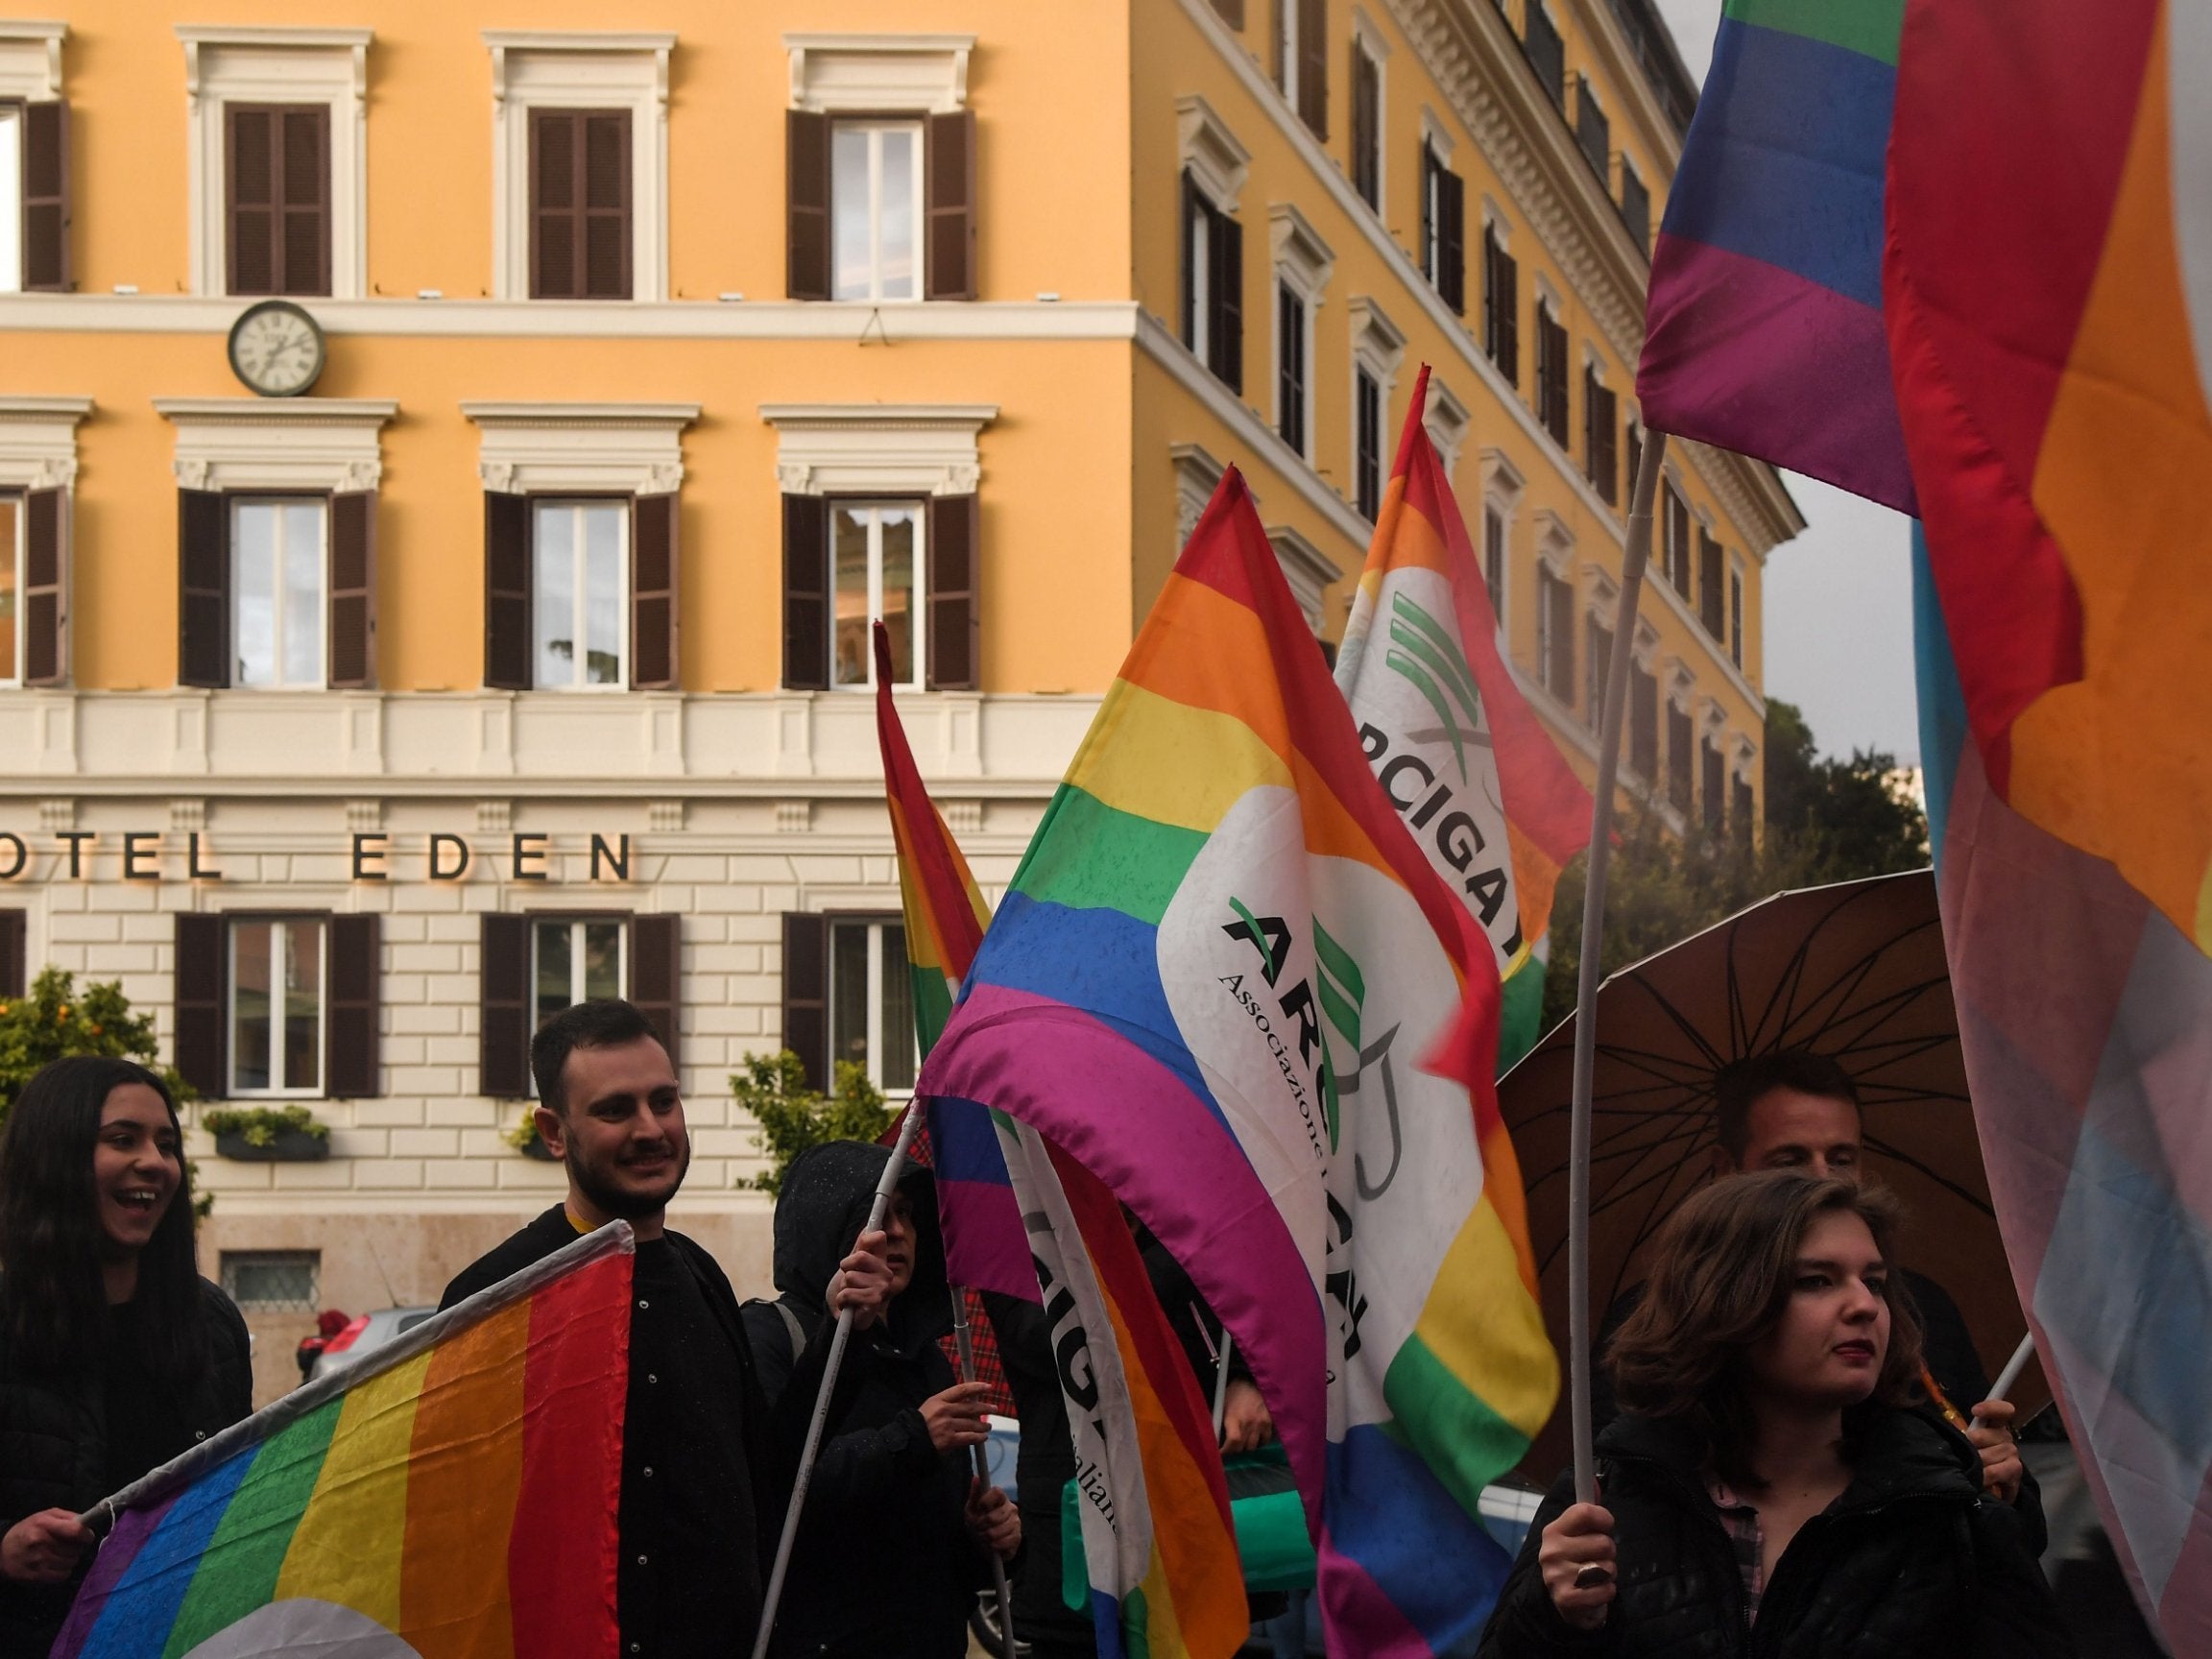 Activists in Rome protest outside a hotel owned by Brunei